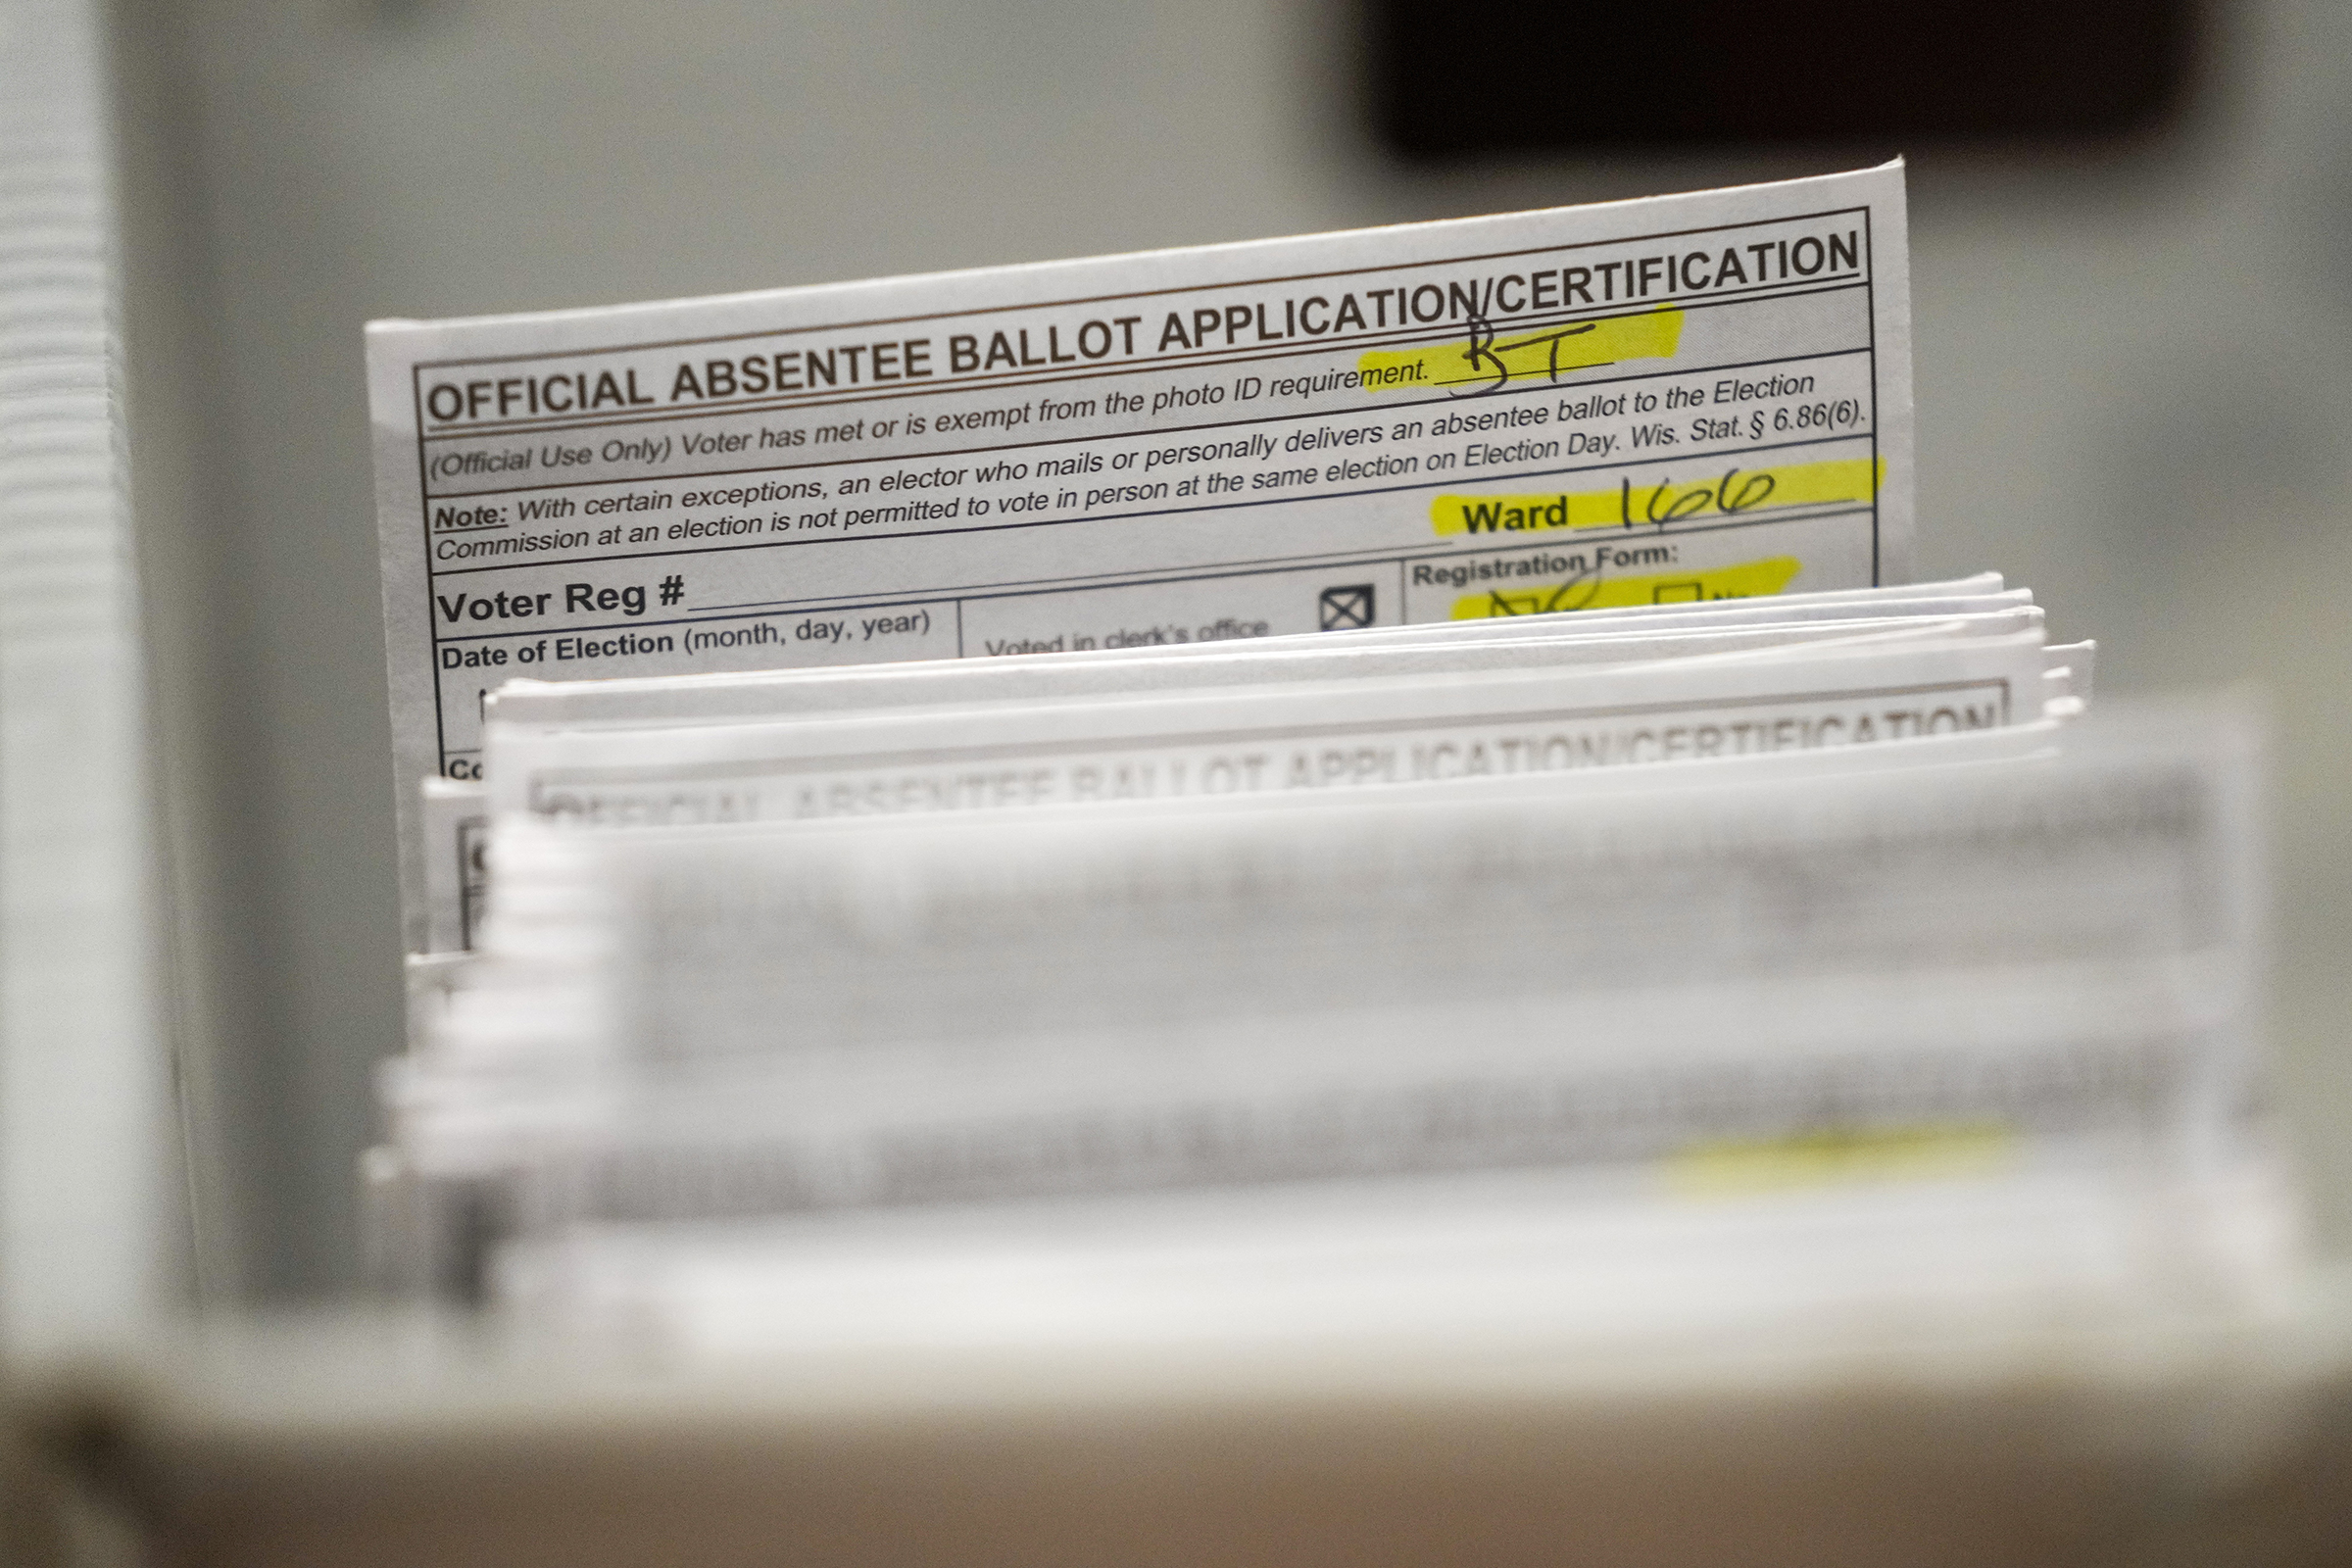 Clerks say new absentee ballot envelopes will prevent mistakes